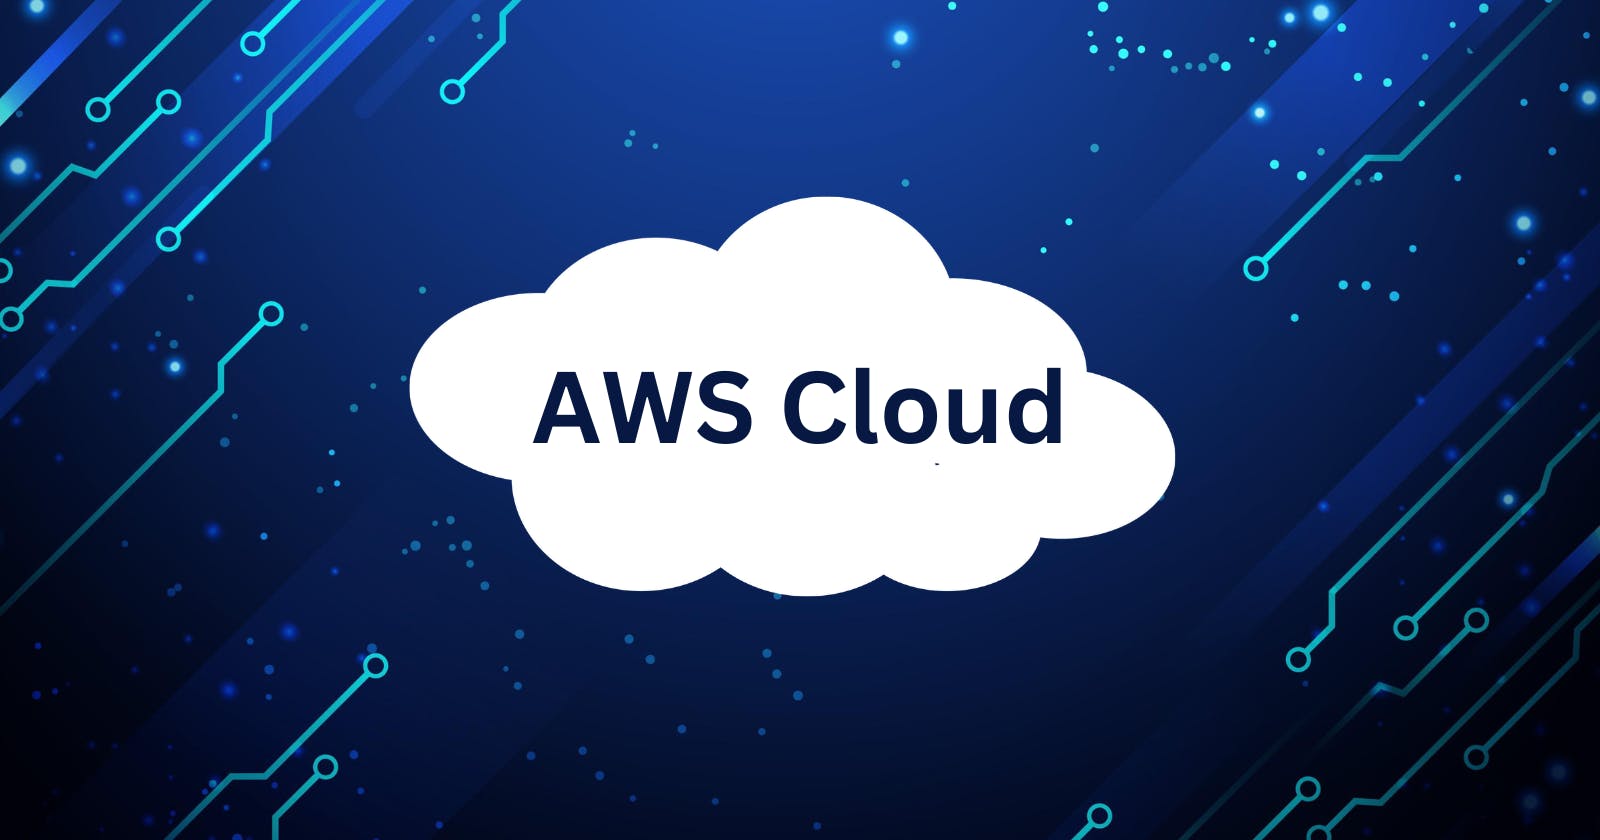 Complete Guide: AWS Account Creation, EC2 Instance Setup, and Connecting Methods Explained